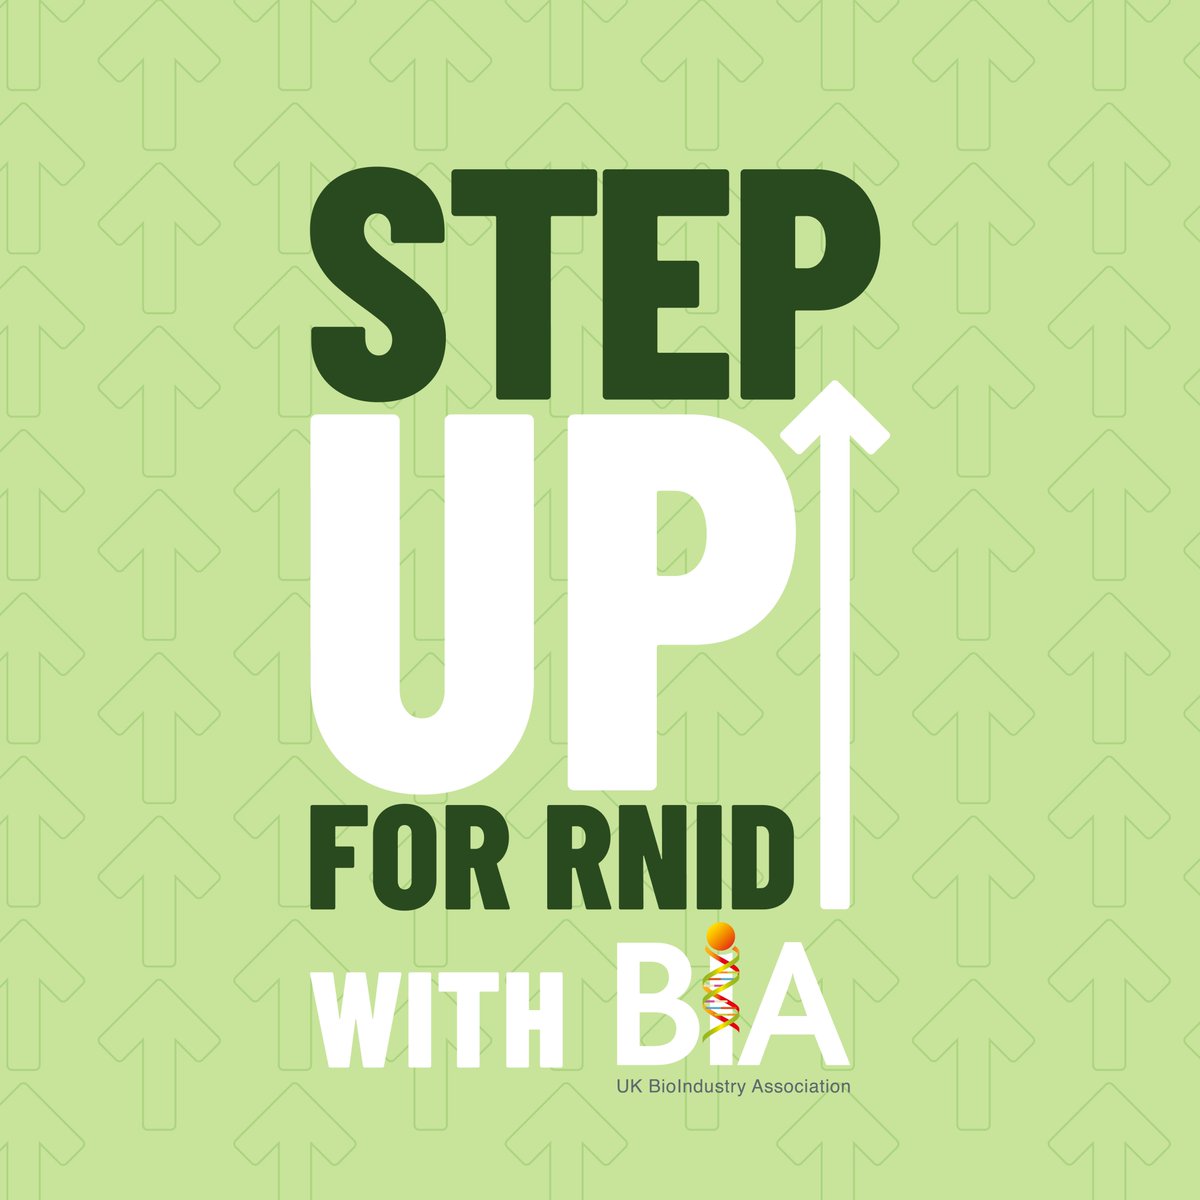 Only 4 days left to sign up to ‘Step Up for @RNID - with the BIA' #DeafAwarenessWeek challenge ➡️ ow.ly/HRg550RkV6h 🏃‍♂️ Run: strava.com/clubs/BIARunne… 🚶‍♂️ Walk: strava.com/clubs/BIAWalke… 🏊‍♂️ Swim: strava.com/clubs/BIASwimm… 🚴‍♂️ Cycle: strava.com/clubs/BIACycli… #BIAStepUpForRNID